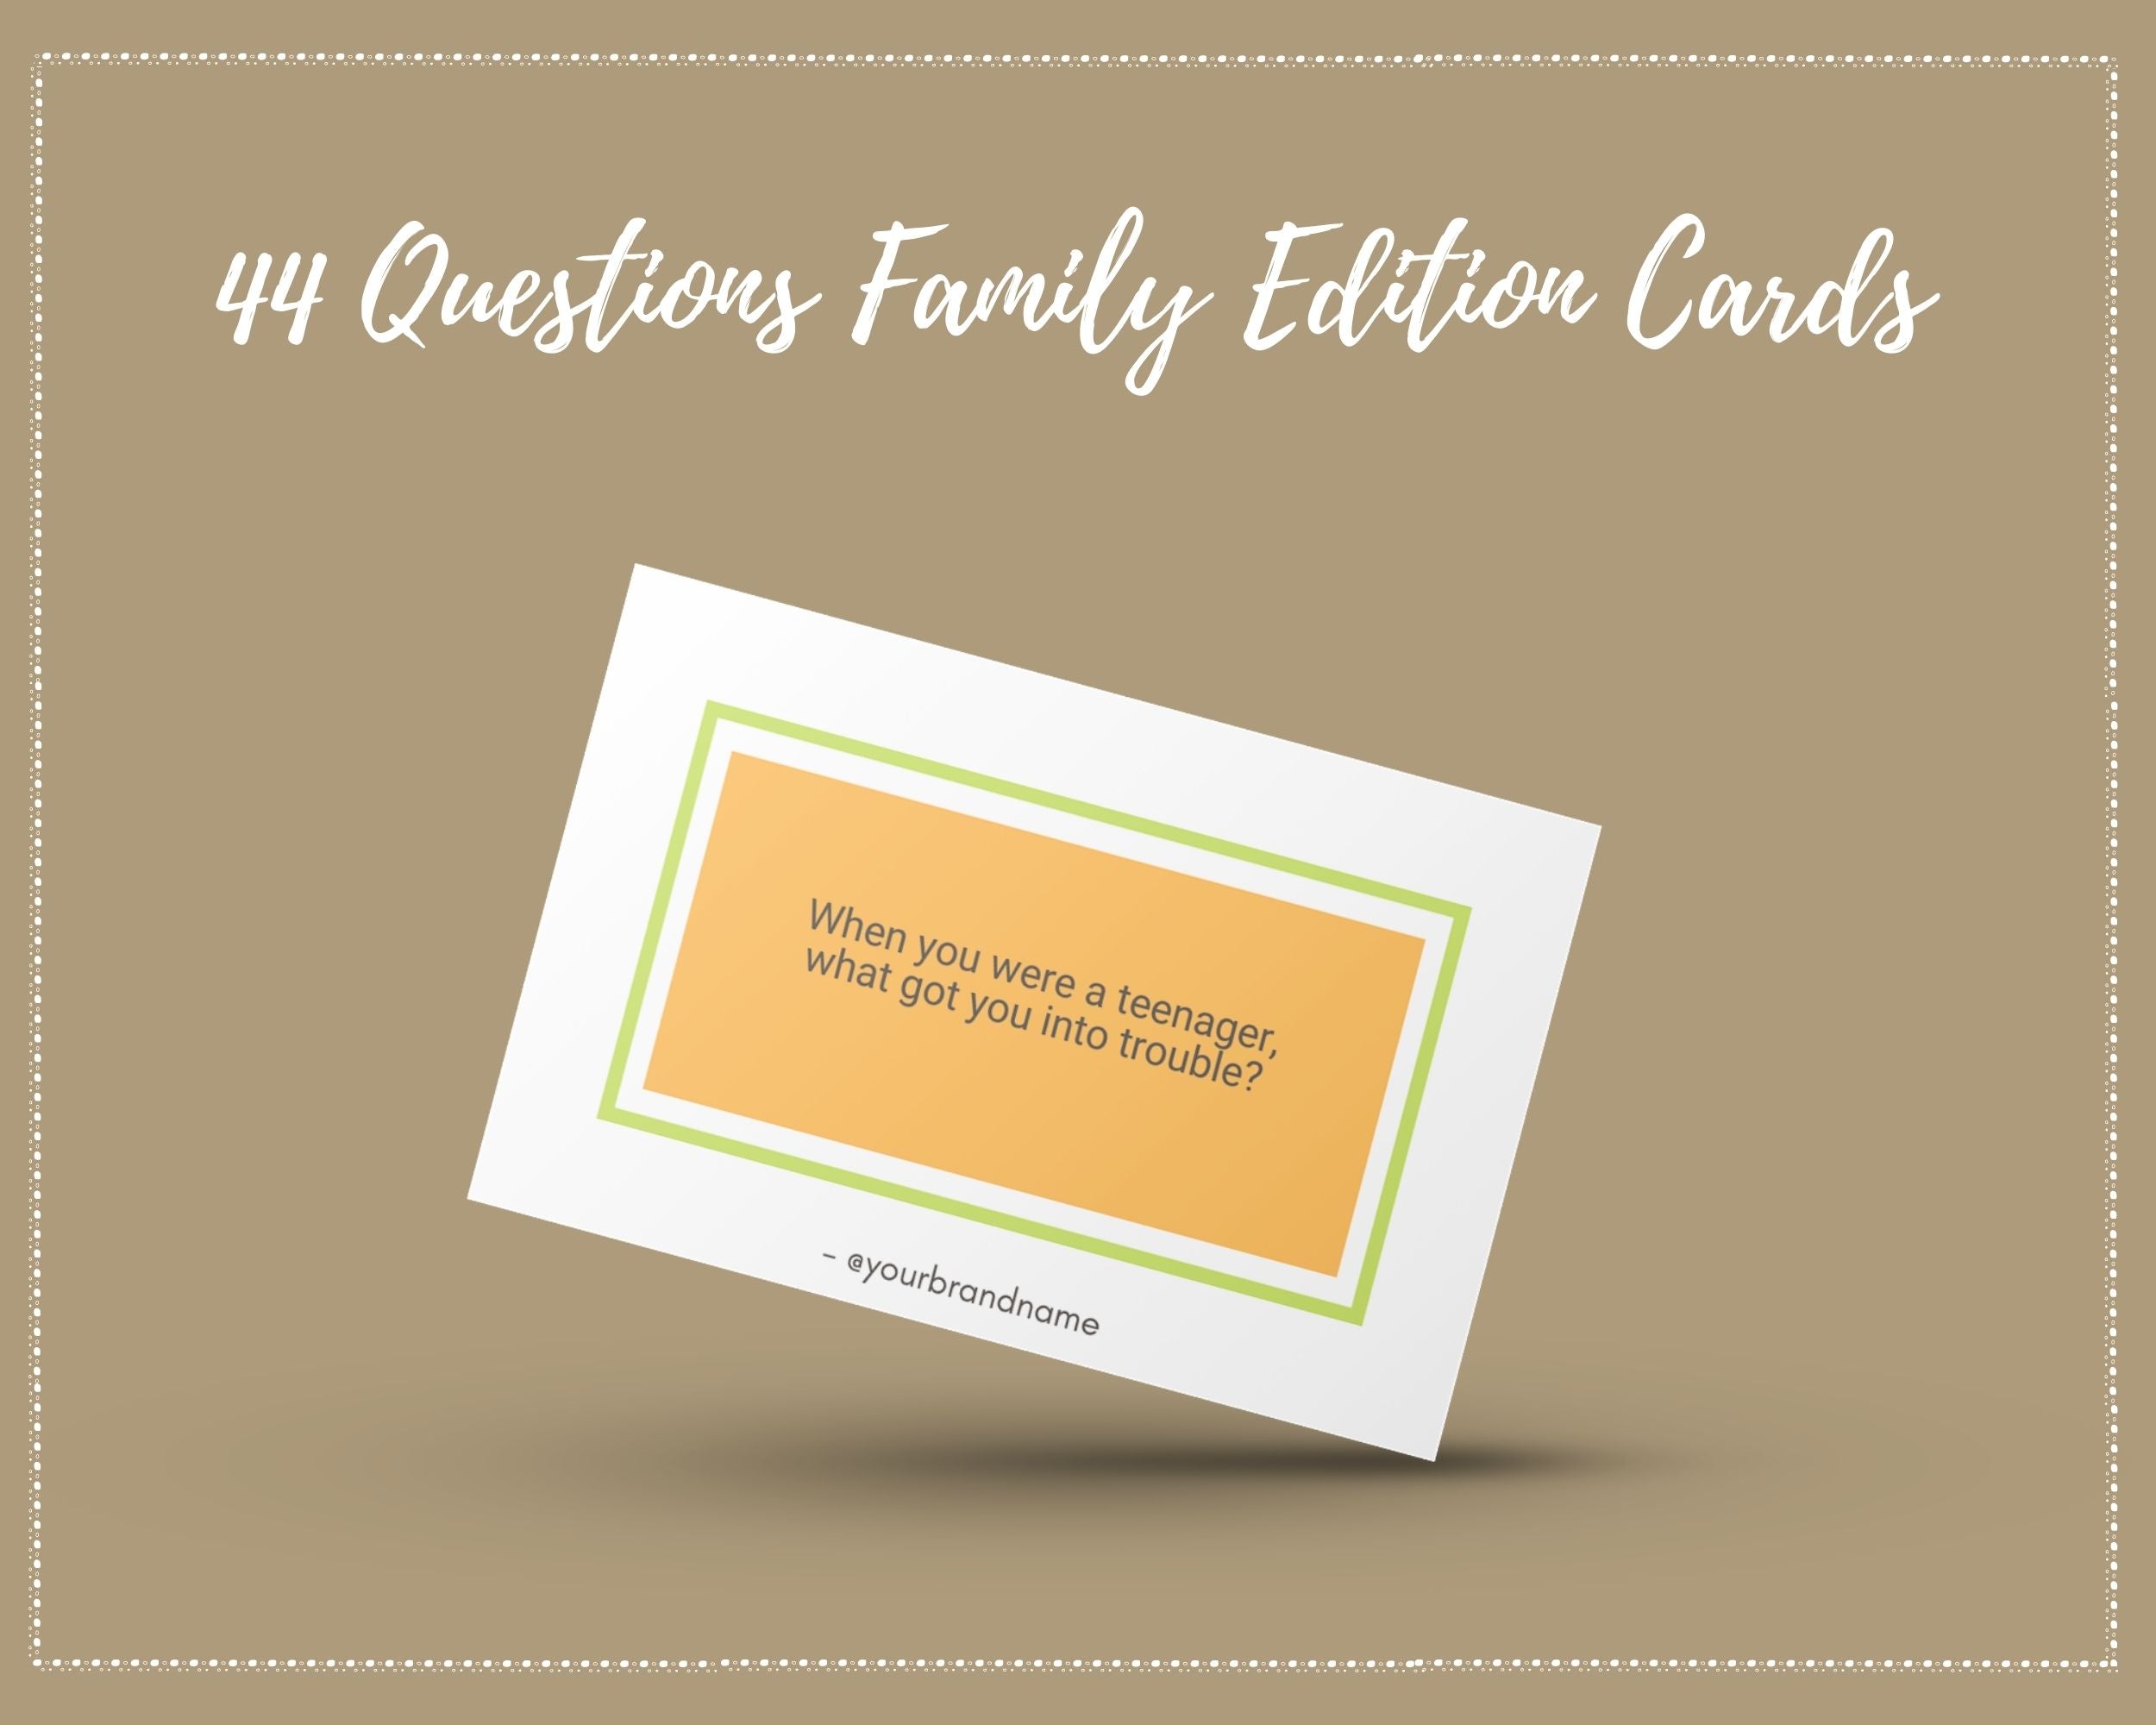 44 Questions Family Edition Cards | Canva Inspirational Cards | Commercial Use